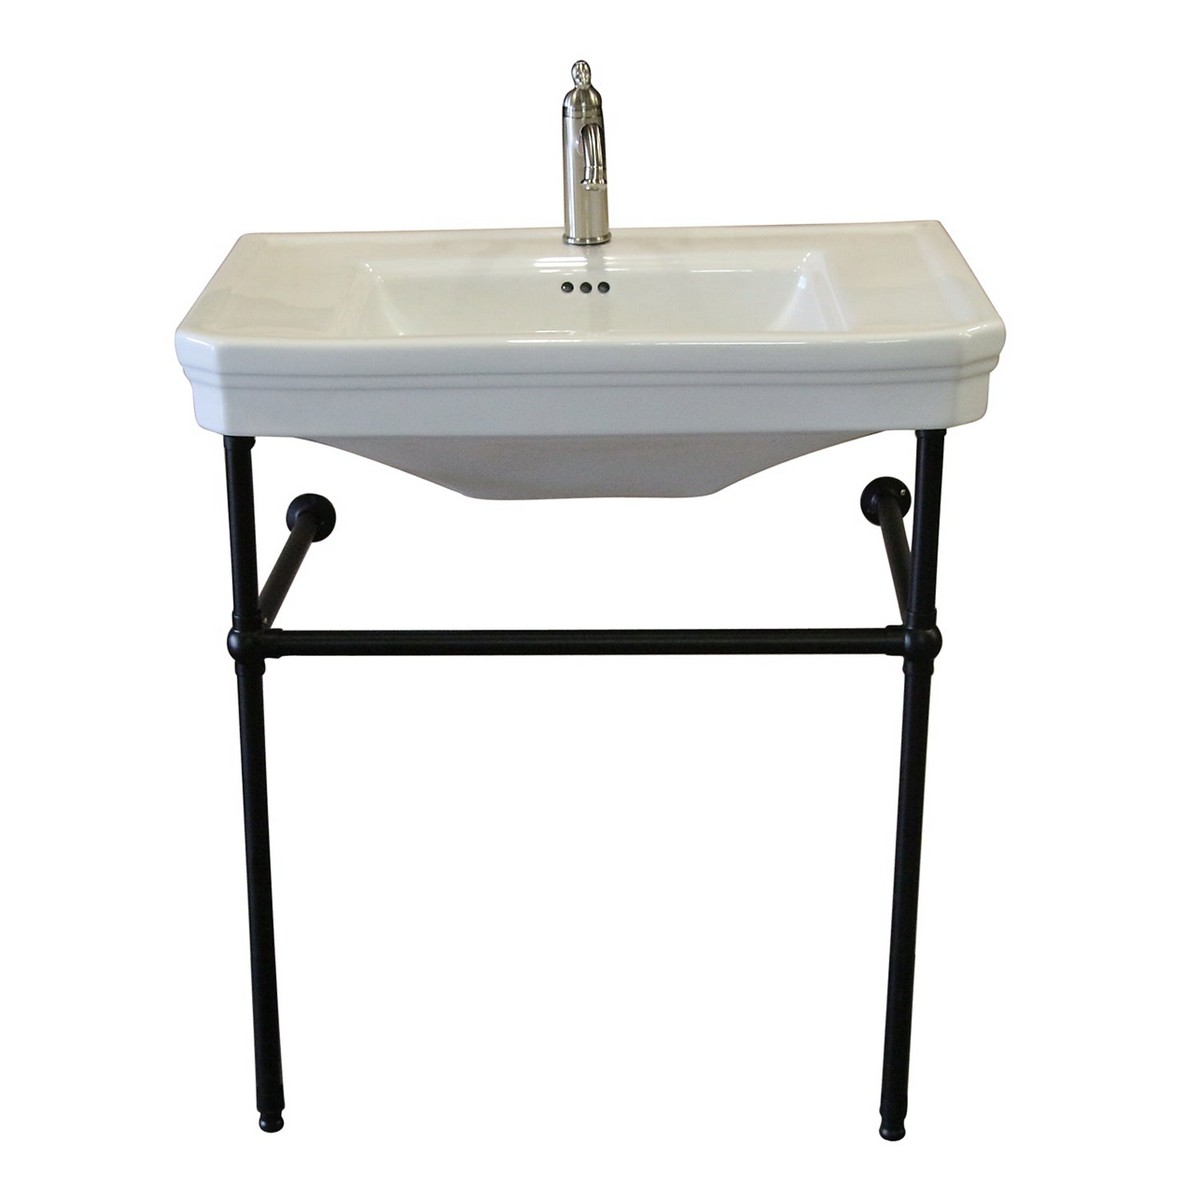 BARCLAY 7WH DREW 30 INCH CONSOLE BATHROOM SINK WITH STAND